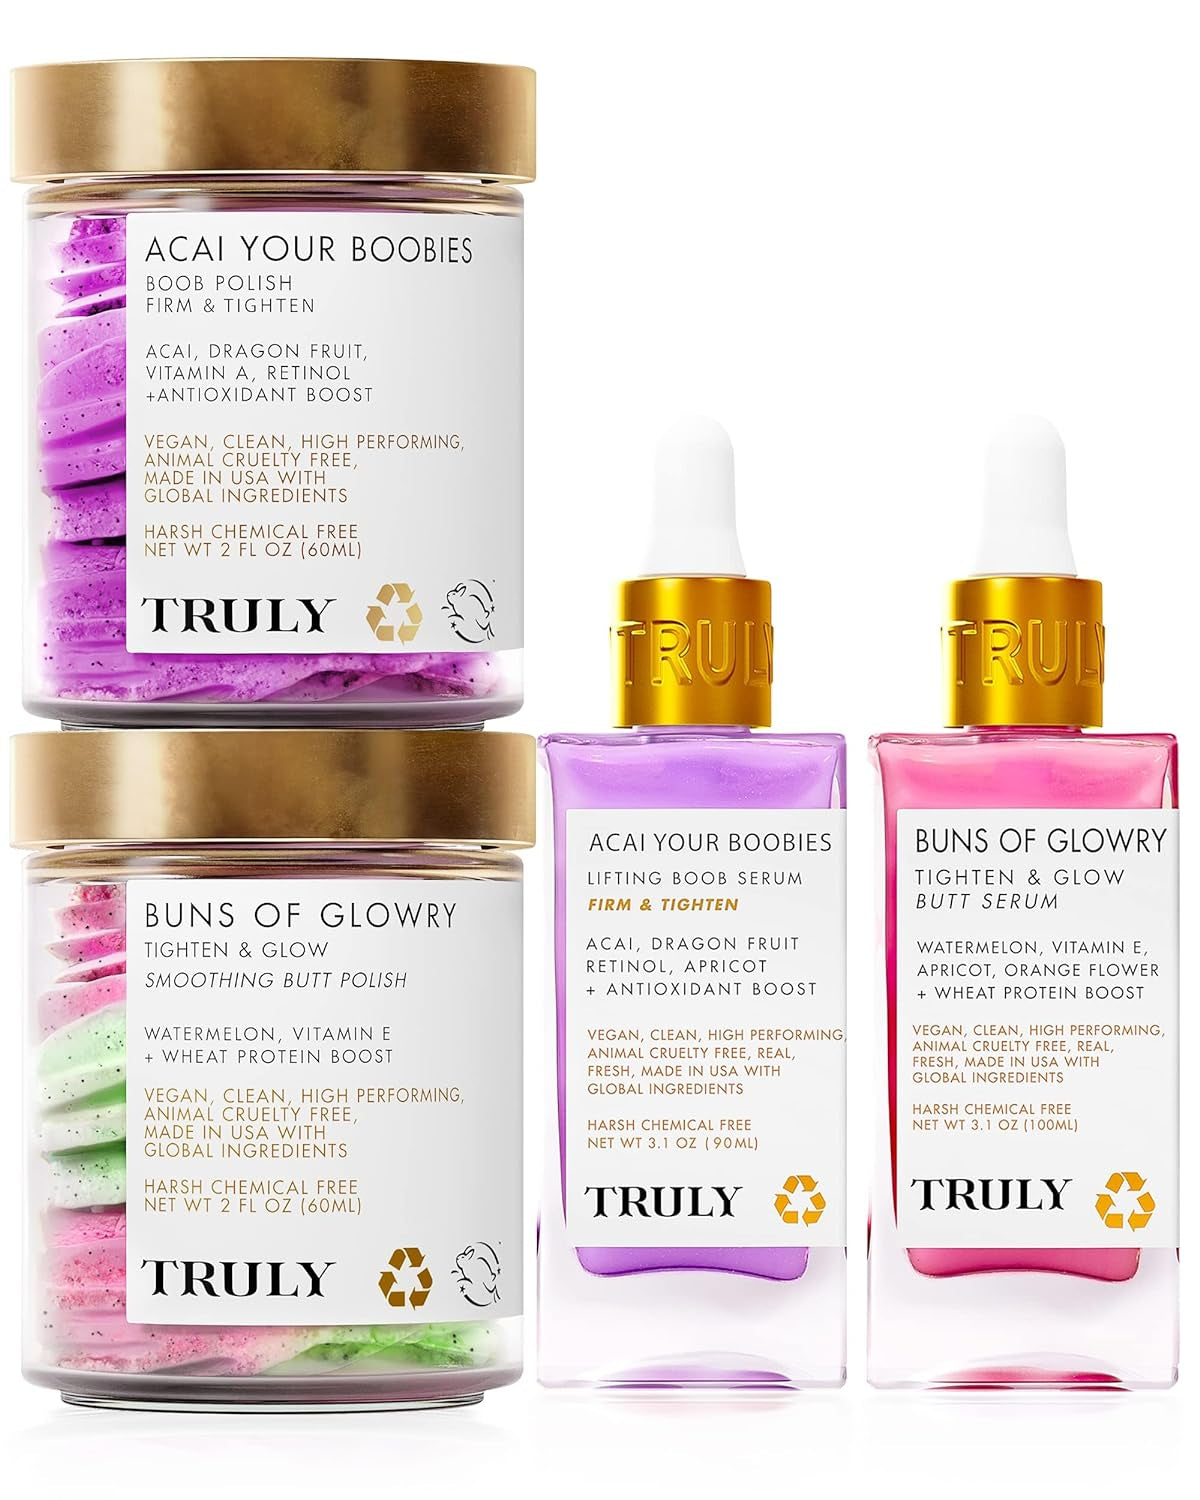 Truly Beauty Brightening Kit - Face and Body Serum Set for Hyperpigmentation and Dark Spots